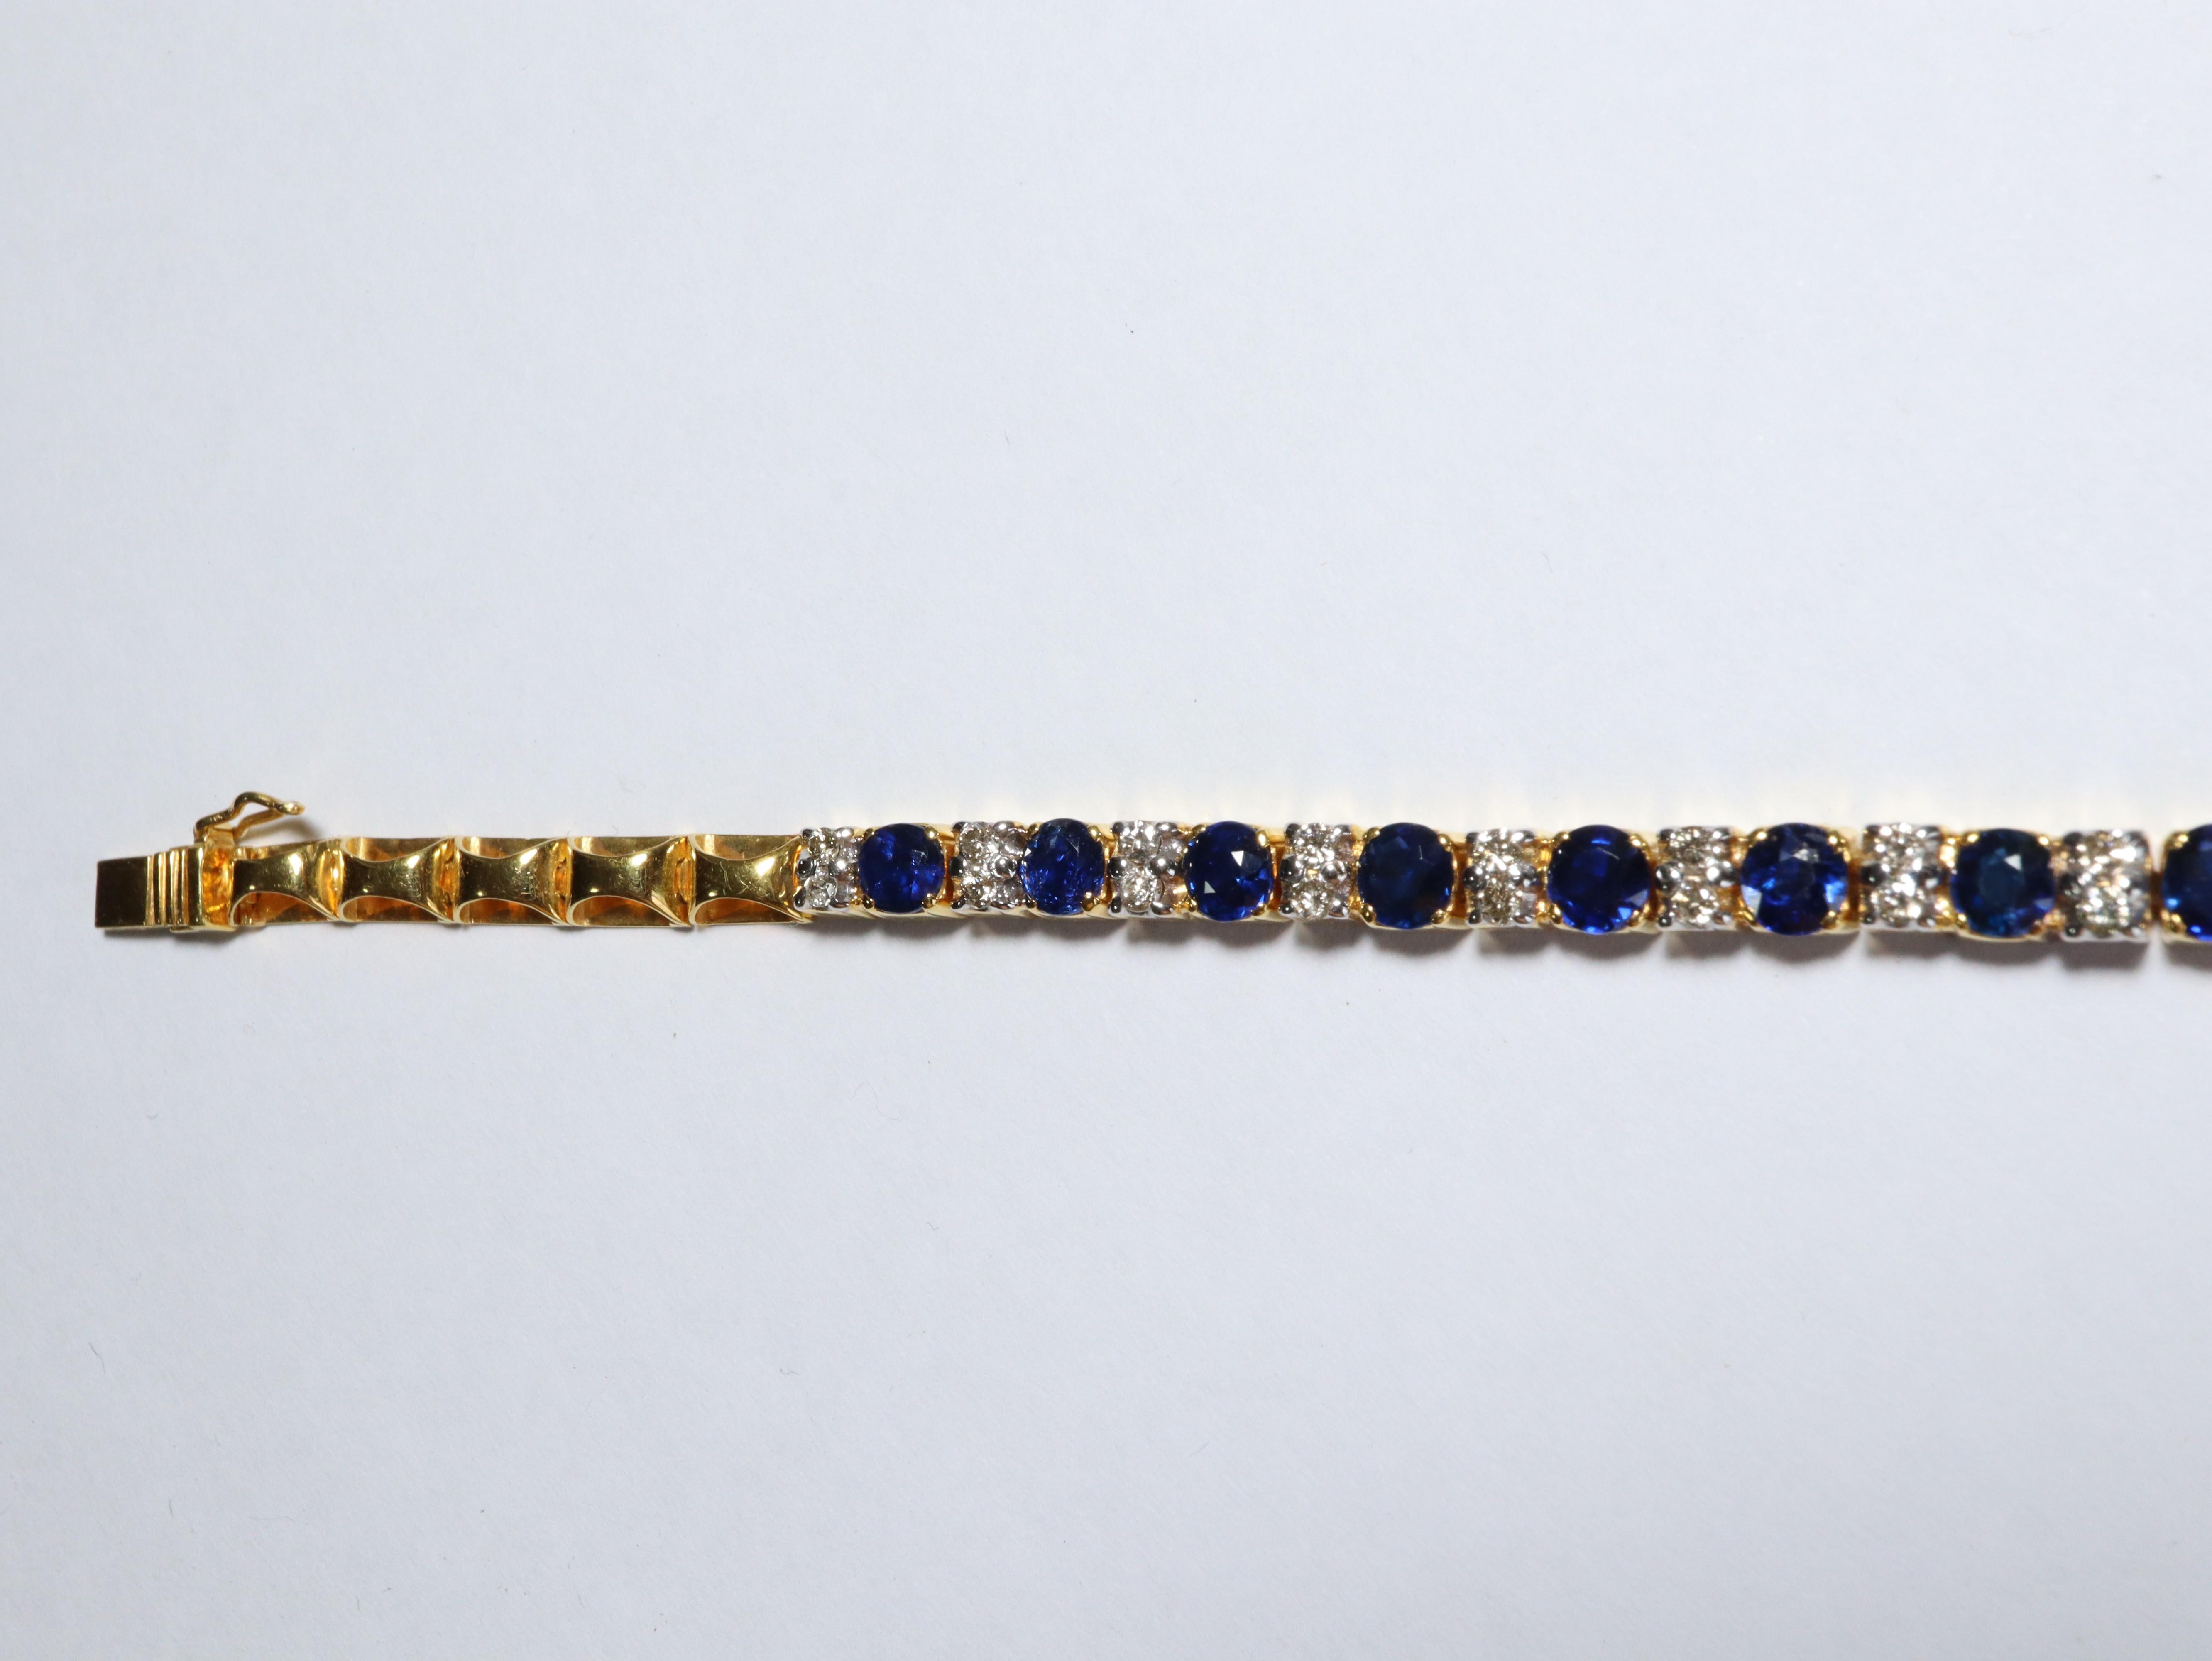 Certified Burma No Heat Blue Sapphire Bracelet with Natural Diamonds in 18k gold For Sale 1